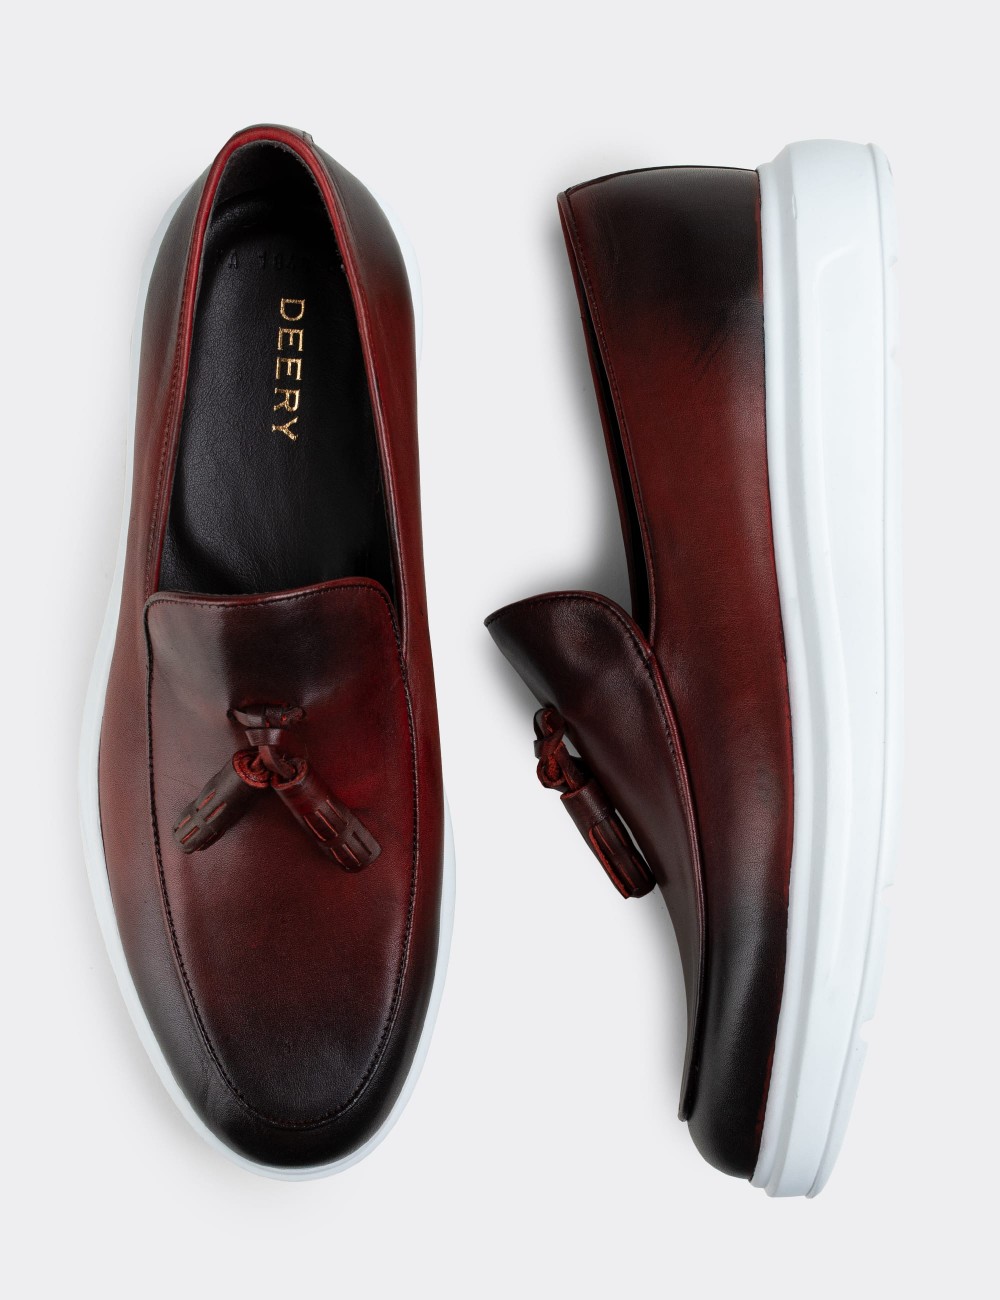 Burgundy  Leather Loafers - 01840MBRDP01